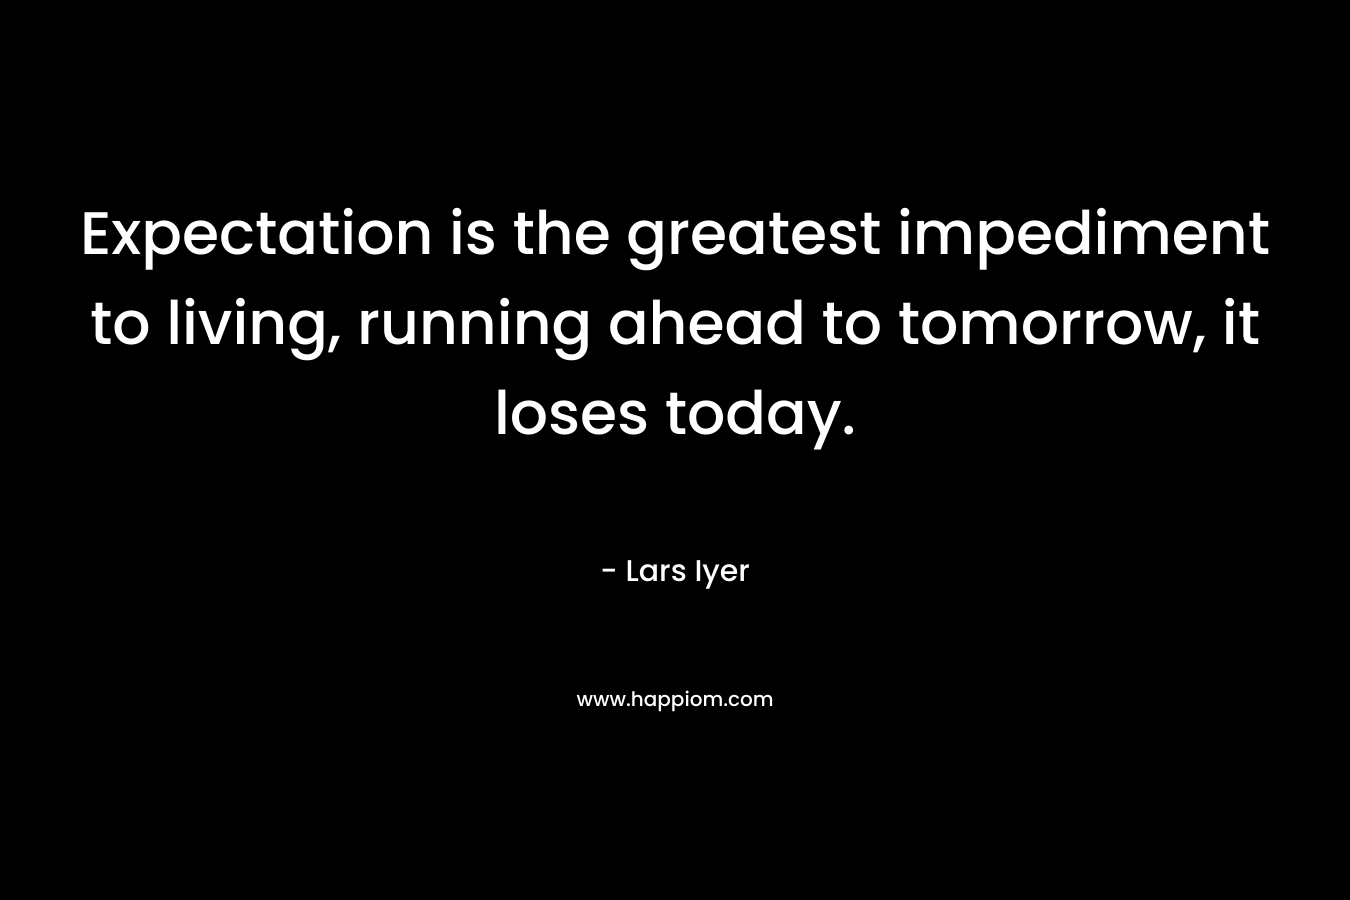 Expectation is the greatest impediment to living, running ahead to tomorrow, it loses today. – Lars Iyer